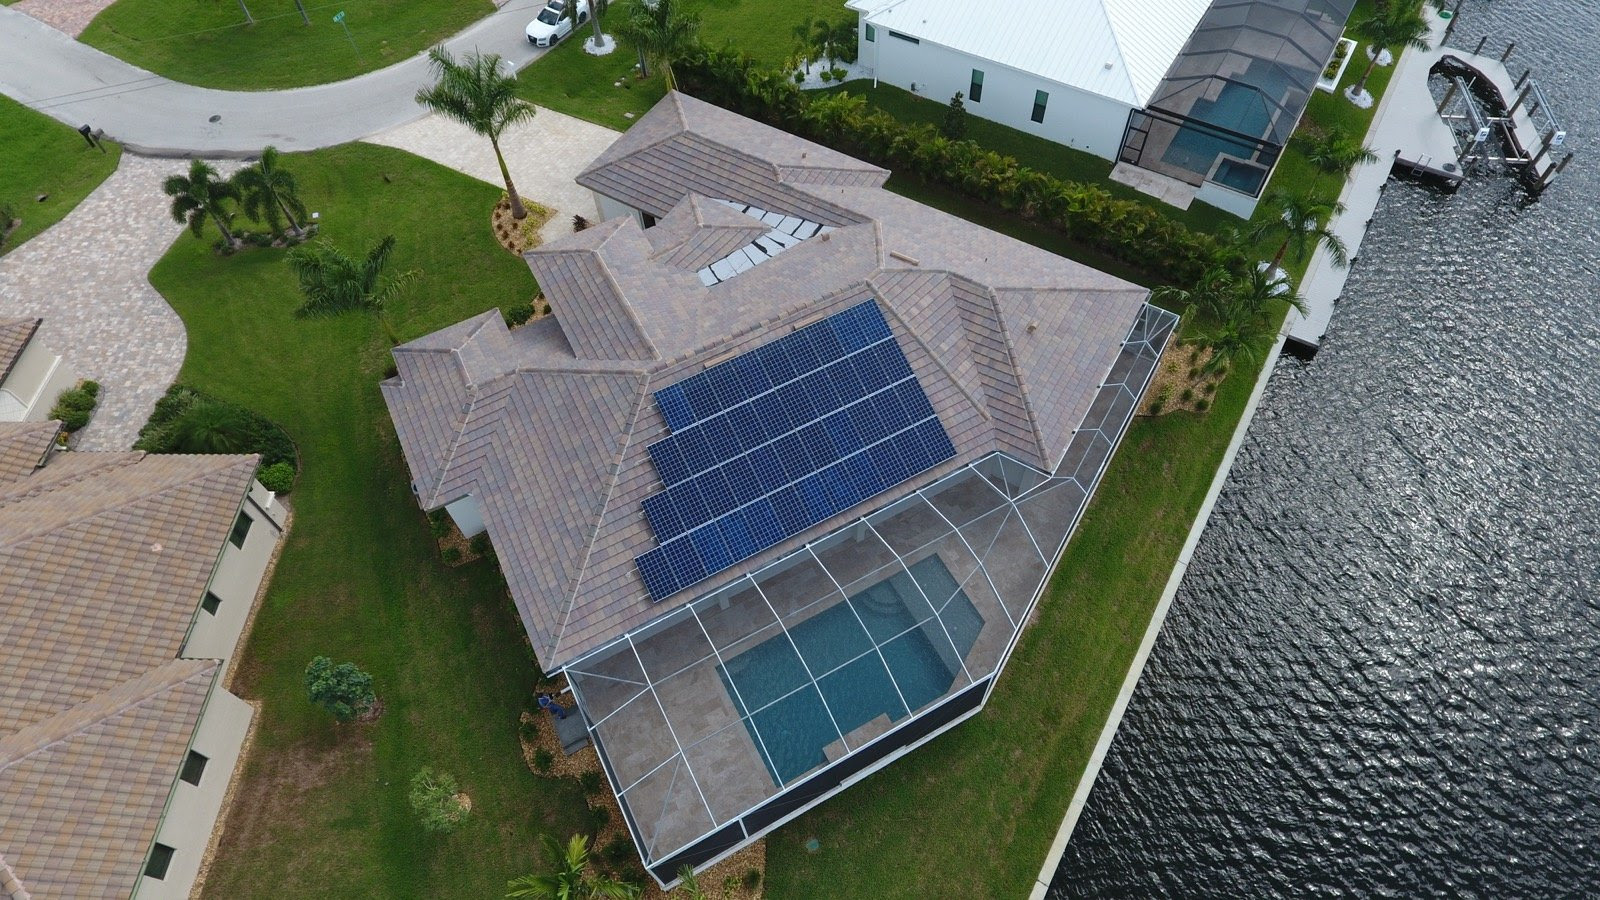 THE NATIONWIDE BATTLE OVER ROOFTOP SOLAR HITS FLORIDA. BECAUSE, FLORIDA.